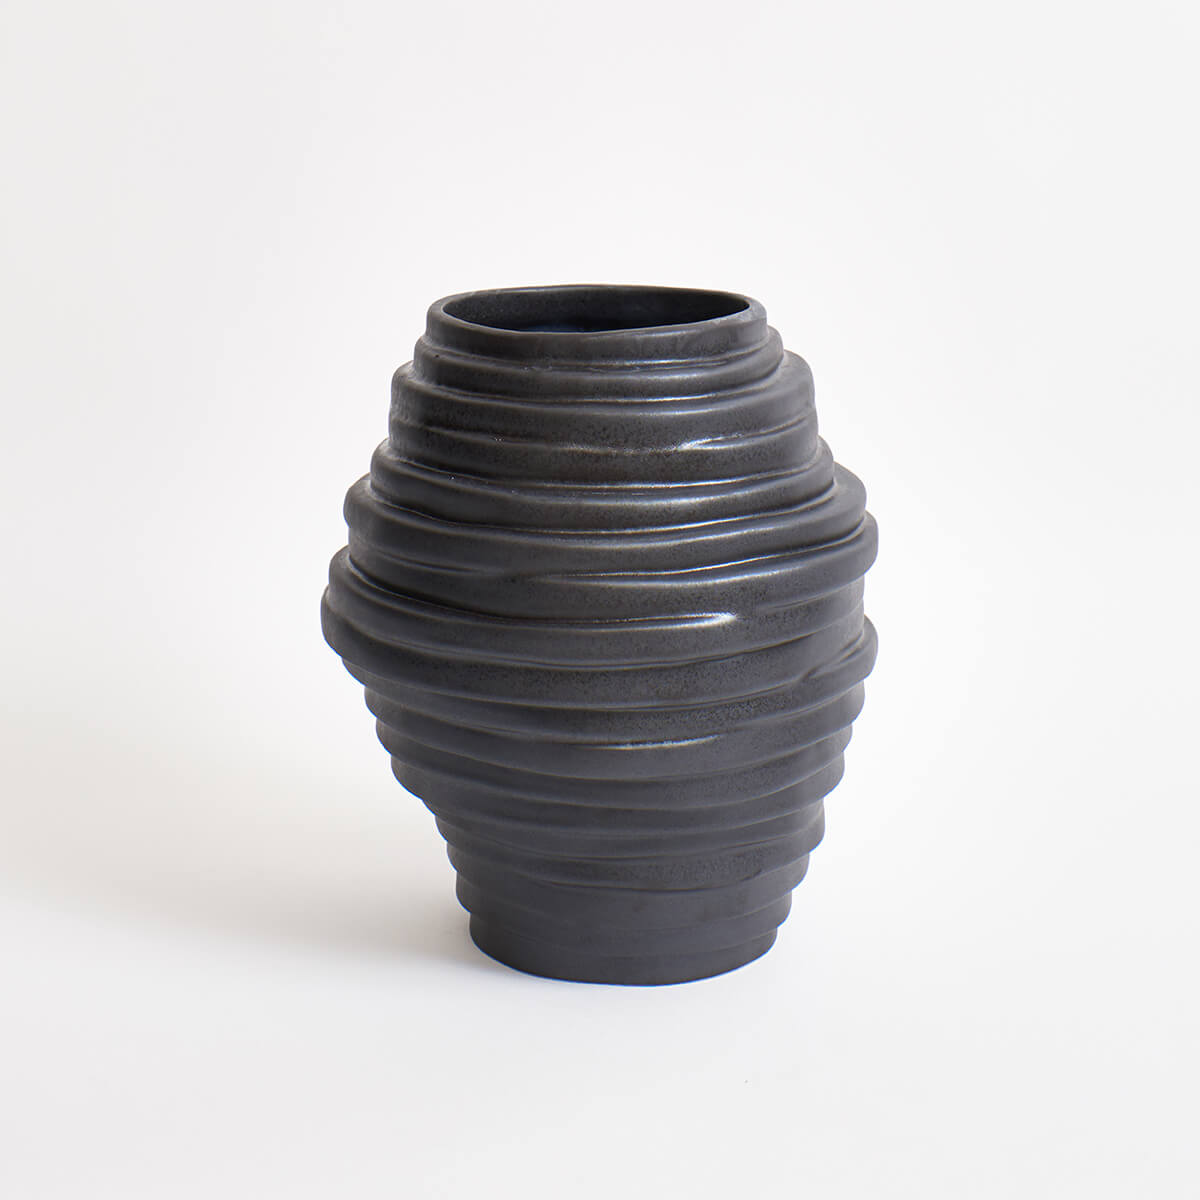 Alfonso Vase - Graphite black vase by Project 213A